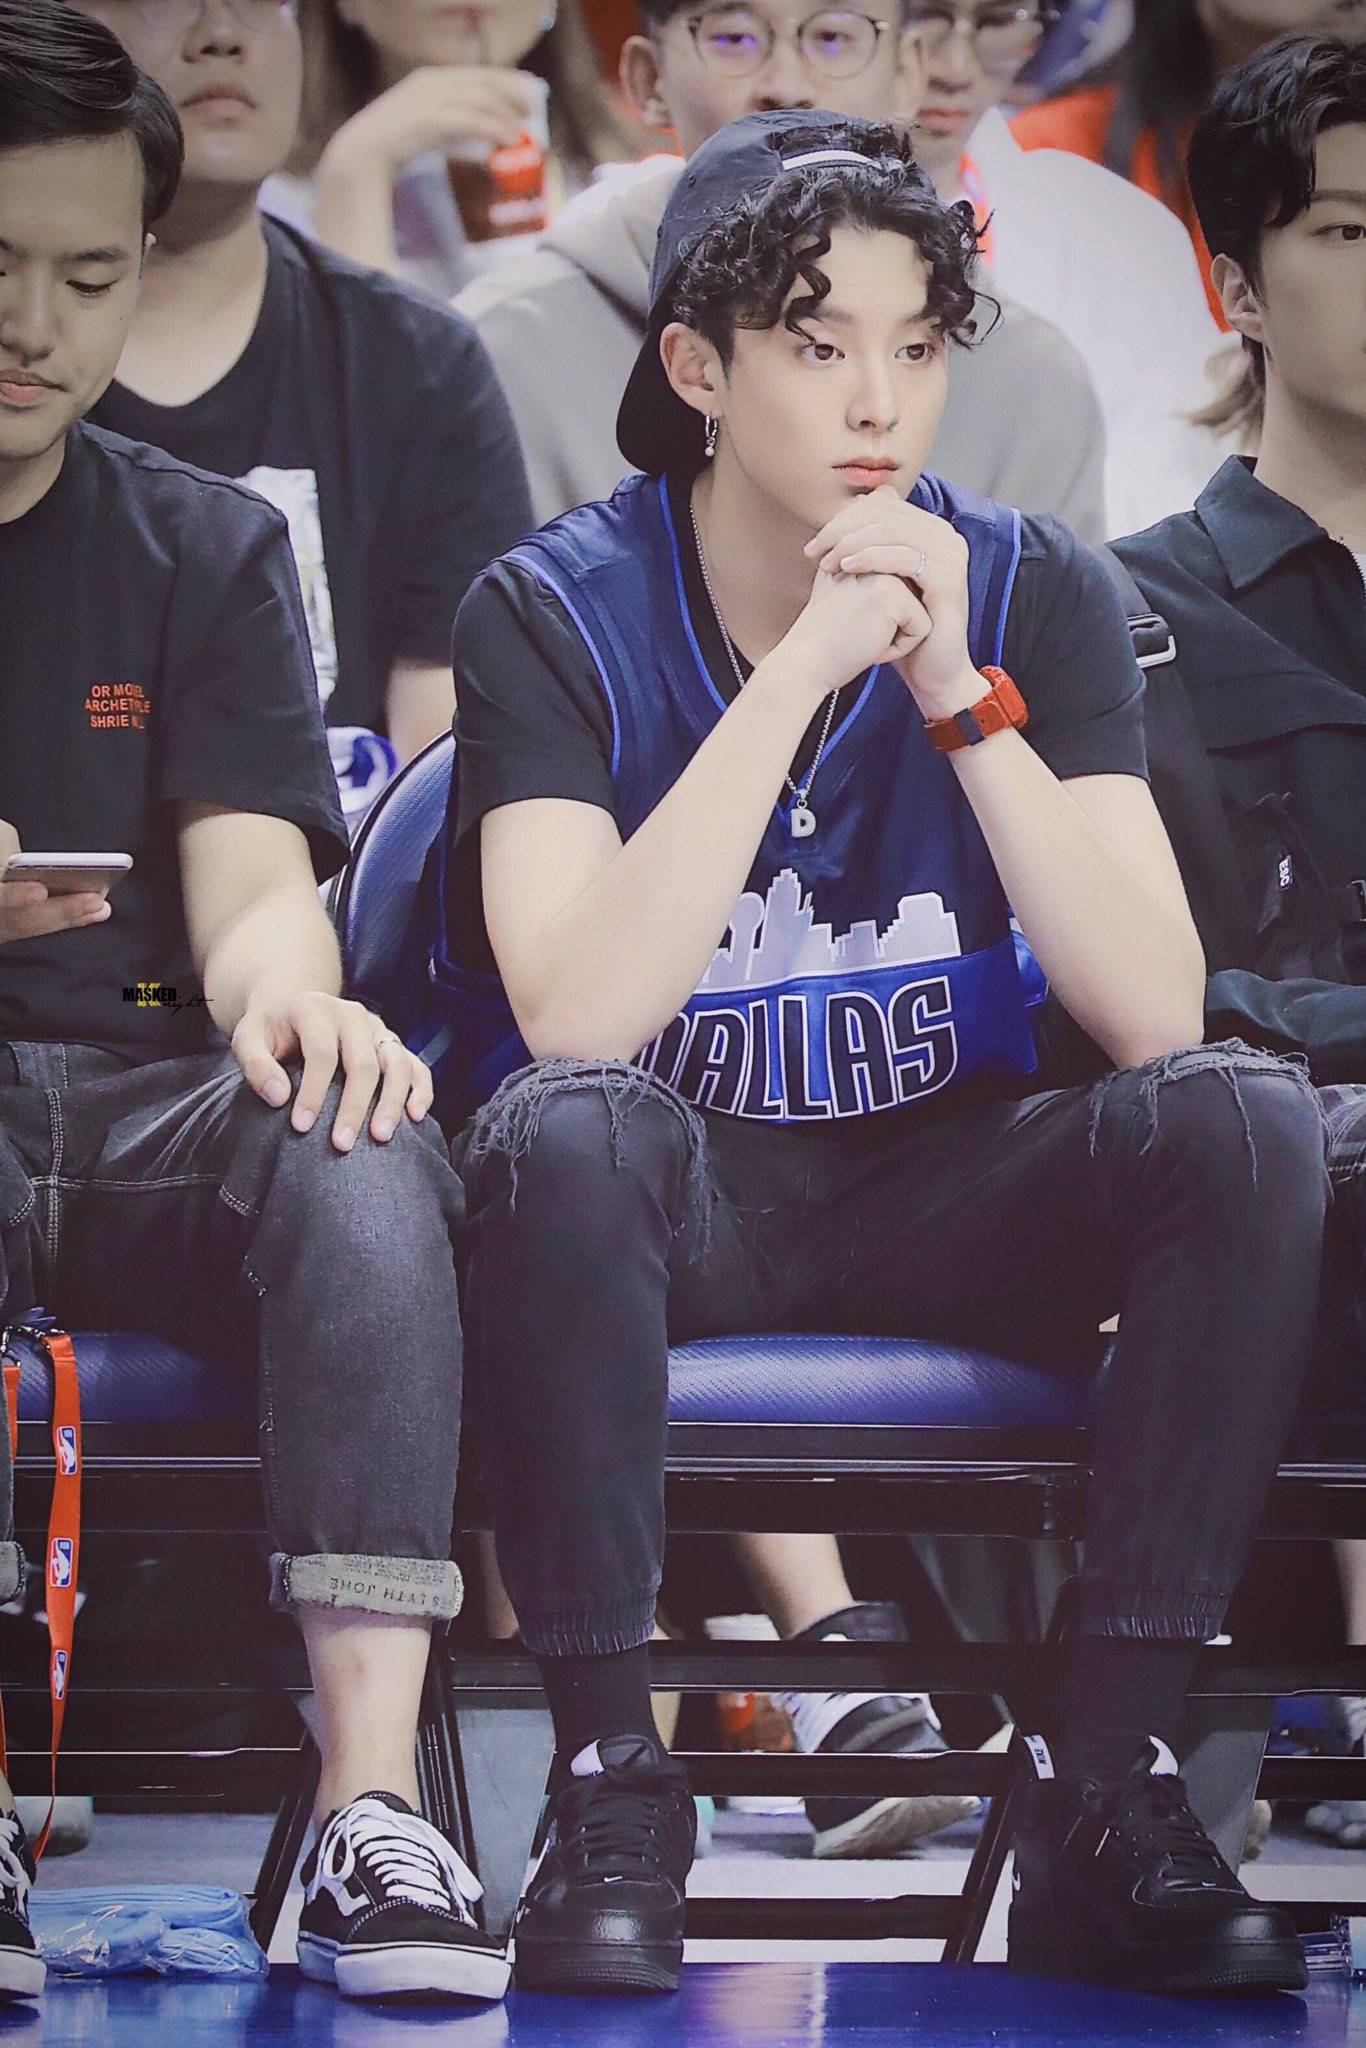 Dylan Wang Daily 😎 on X: [HD] 180713 Super3 Basketball Competition cr:  maskedknight & seveneleven #DylanWang #王鹤棣  / X